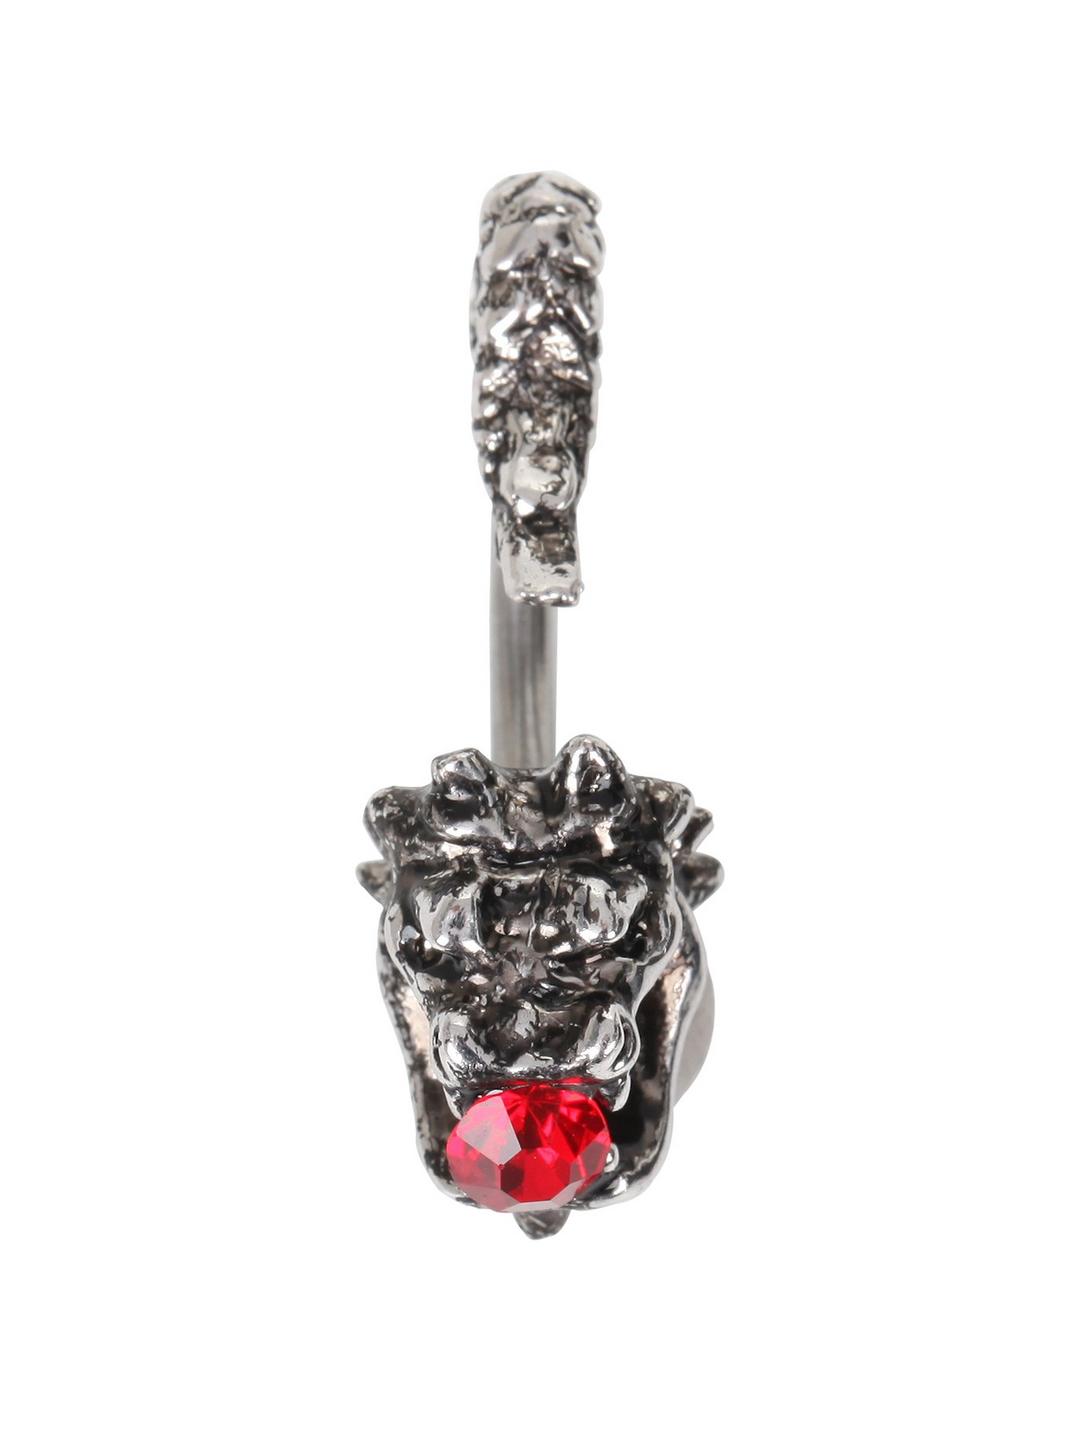 14G Steel Dragon Head & Tail Navel Barbell, , hi-res